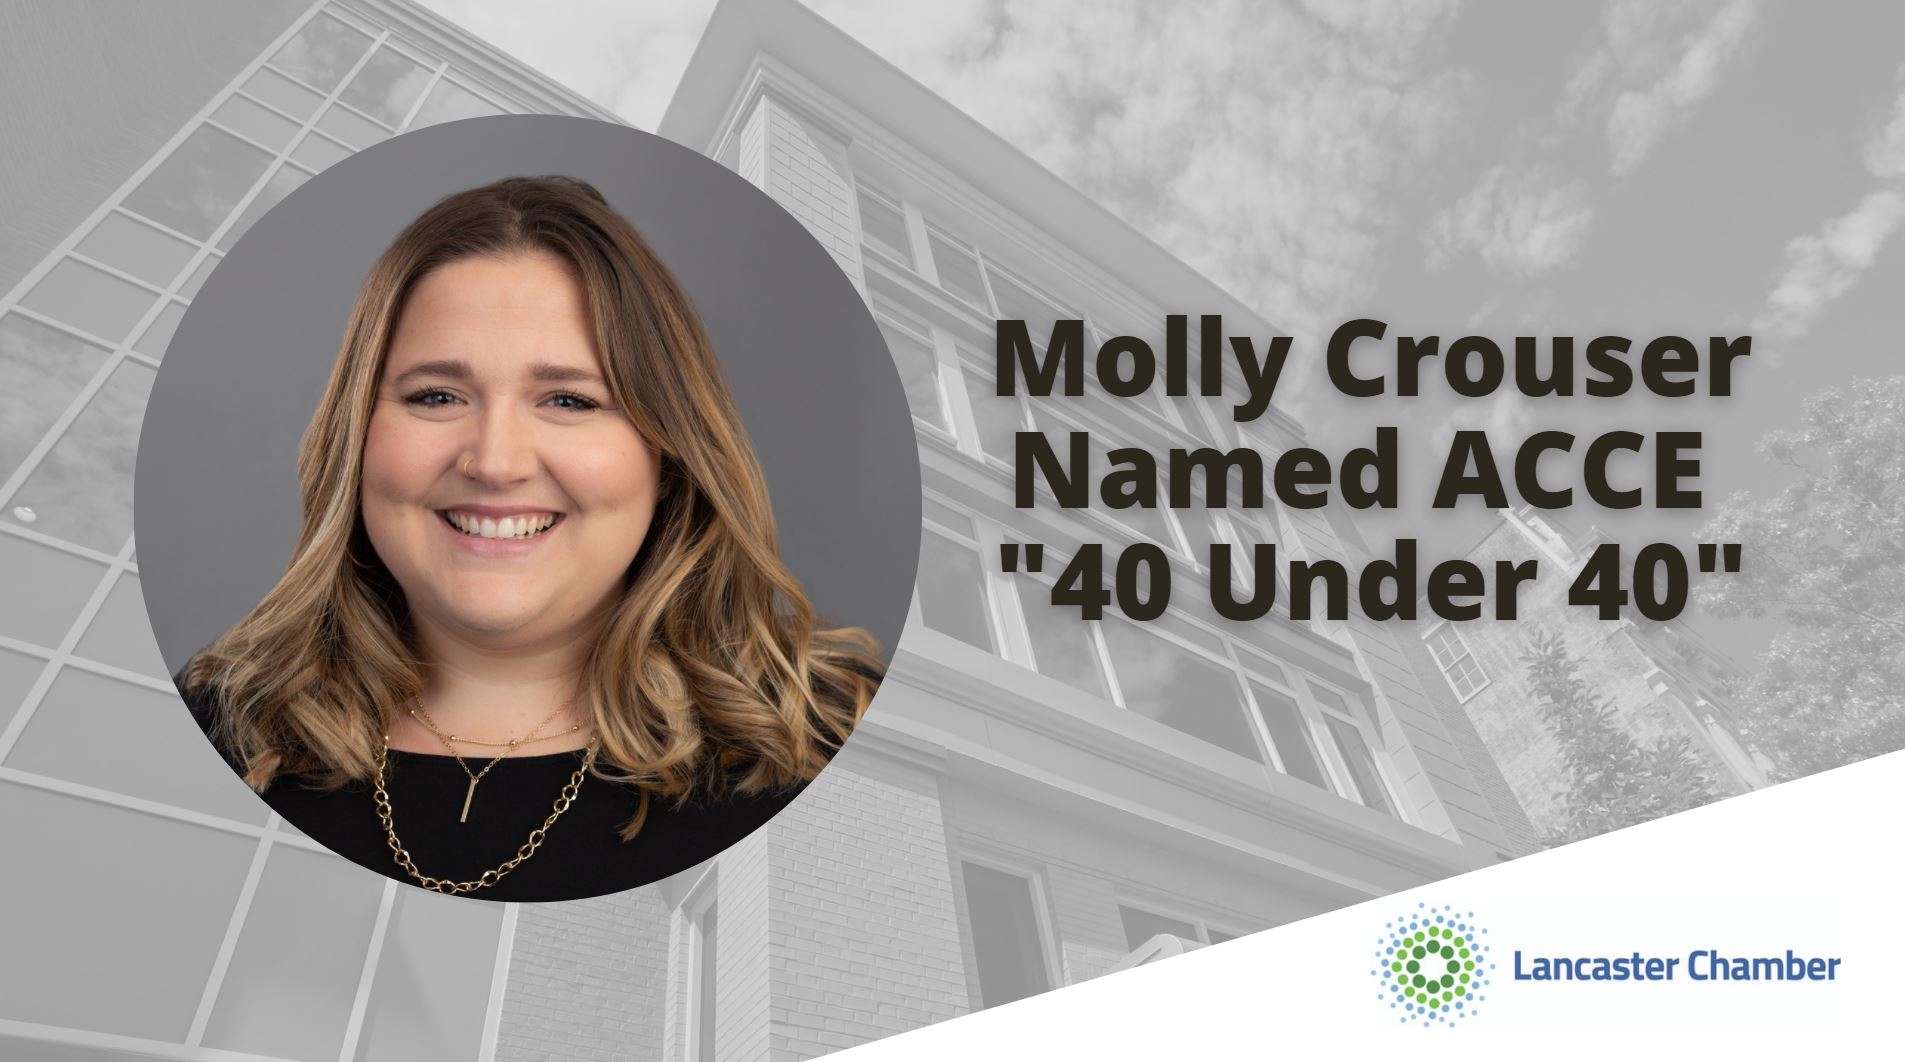 Molly Crouser Named ACCE 40 Under 40